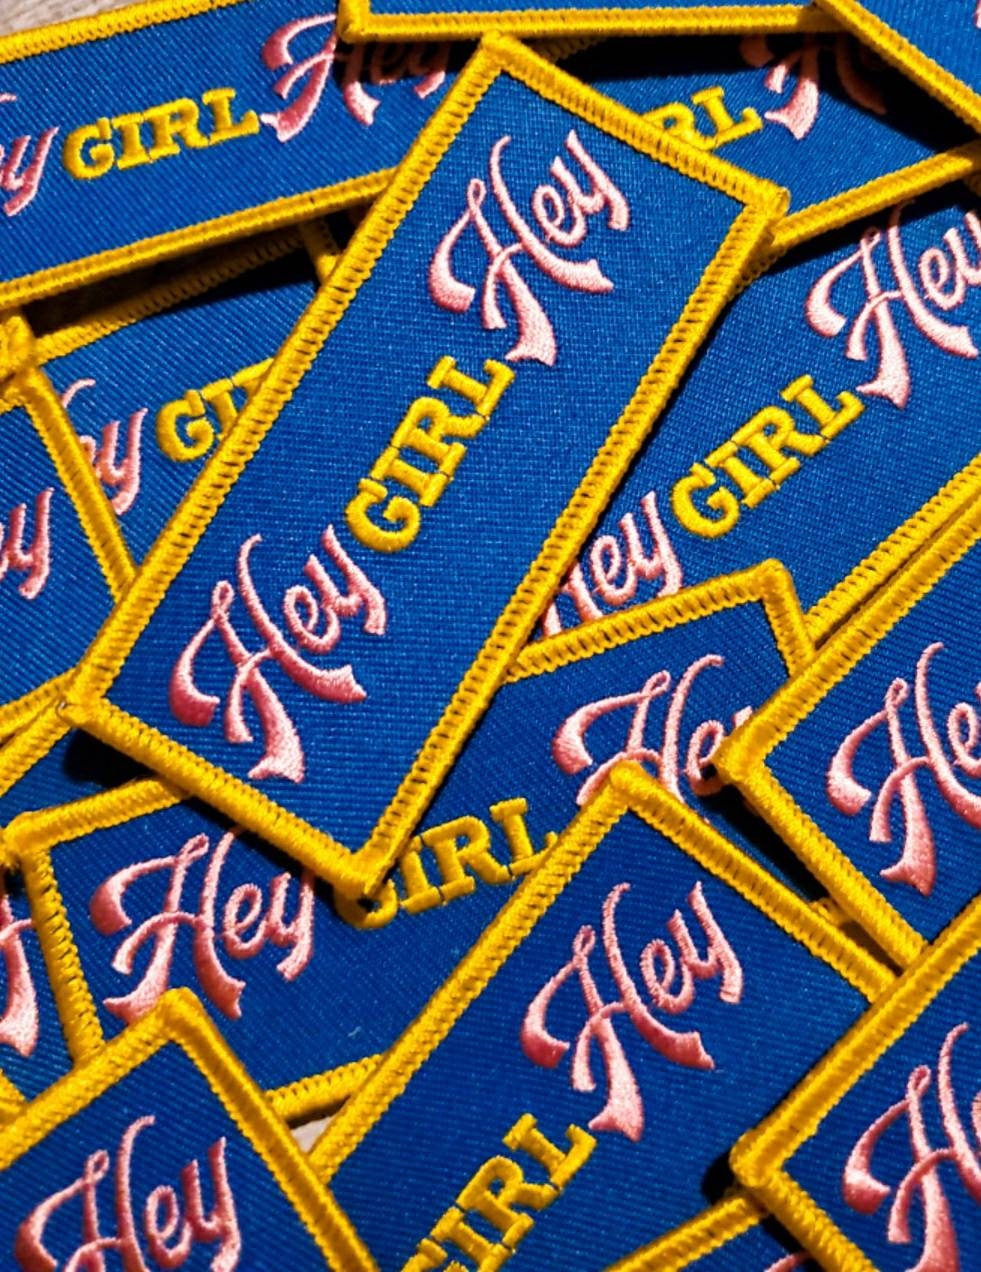 New "Hey Girl Hey," (YELLOW Border) Adorable BFF Badge,Small Patch, Feminist AF, Iron-on Applique, Size 3"x1", Bridal Party